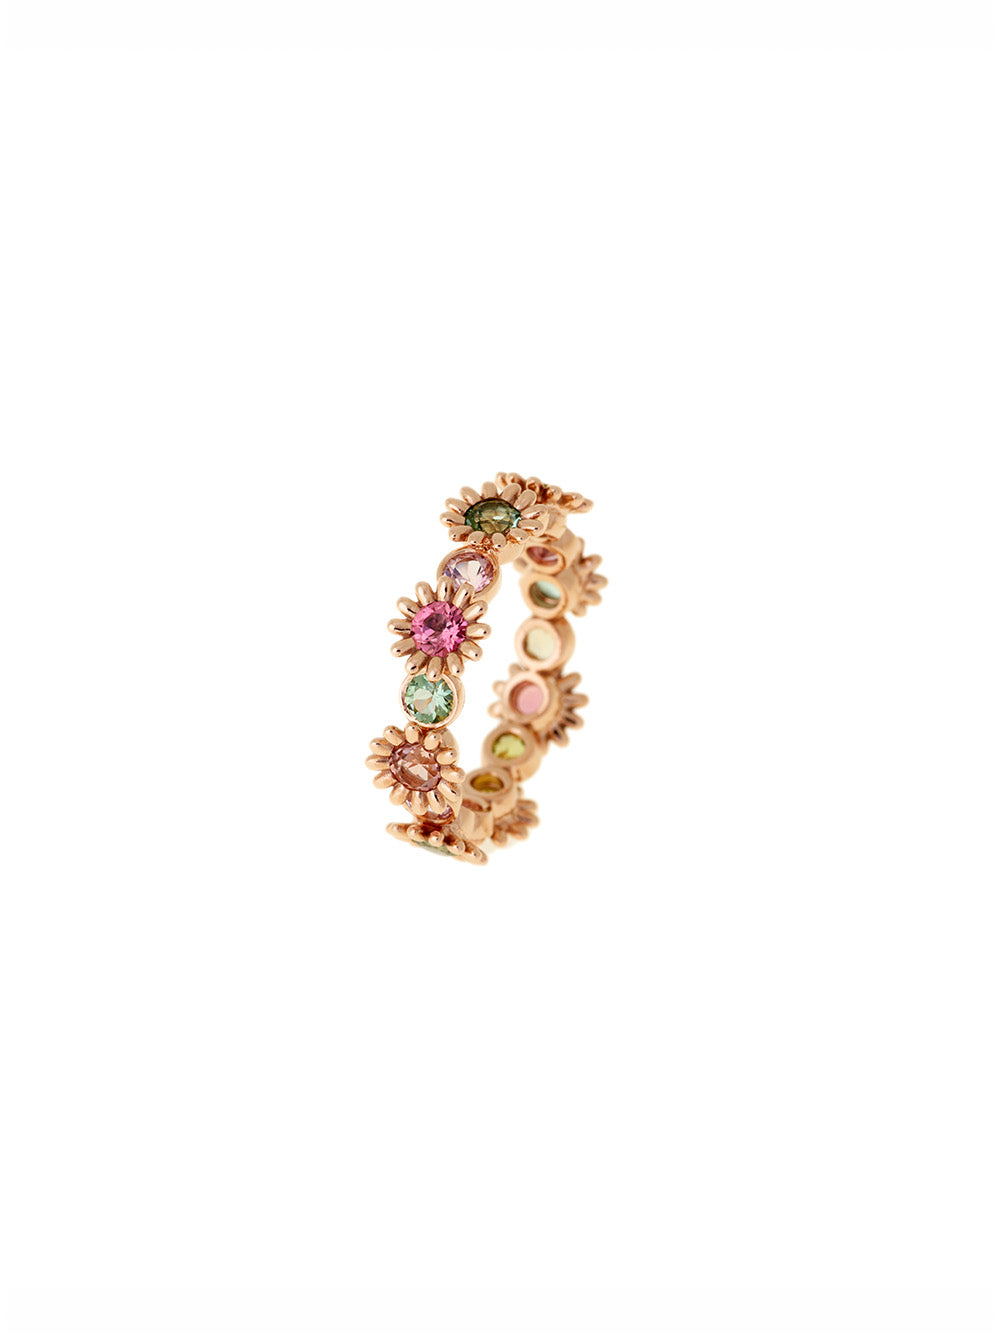 POPPY ROSE GOLD AND TOURMALINE RING